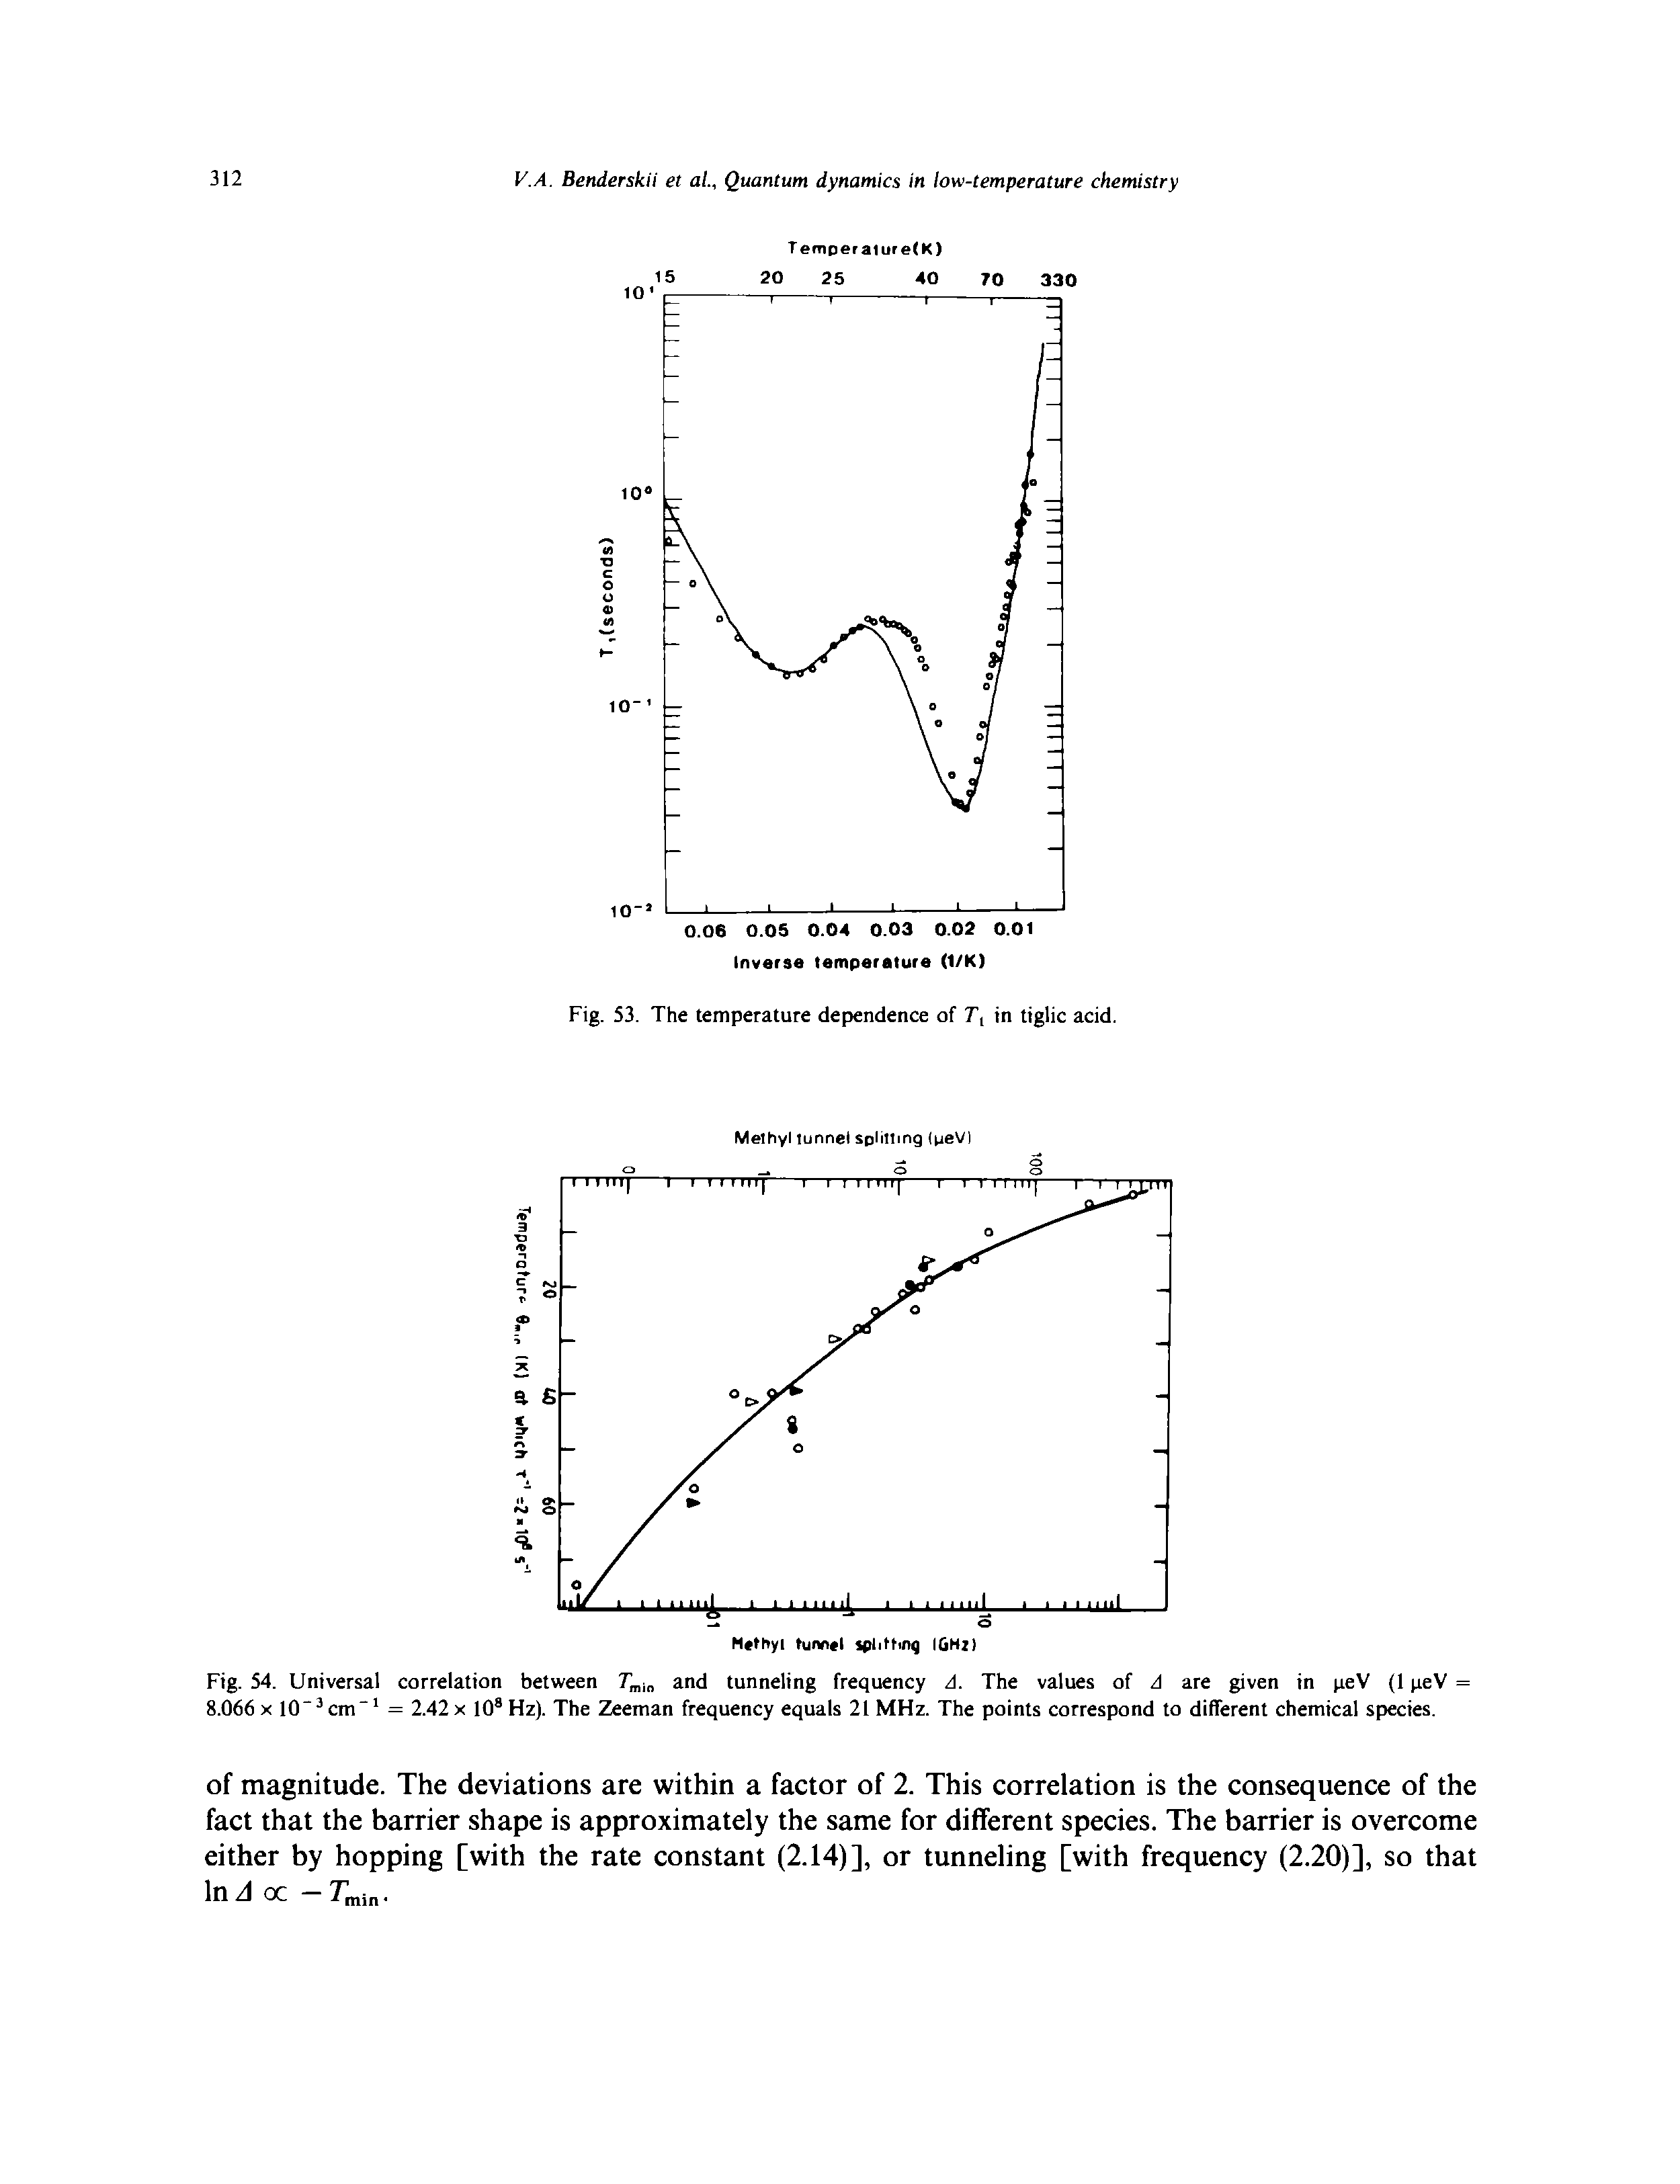 Fig. 54. Universal correlation between T , and tunneling frequency A. The values of A are given in peV (1 peV 8.066 X 10 cm = 2.42 x 10 Hz). The Zeeman frequency equals 21 MHz. The points correspond to different chemical species.